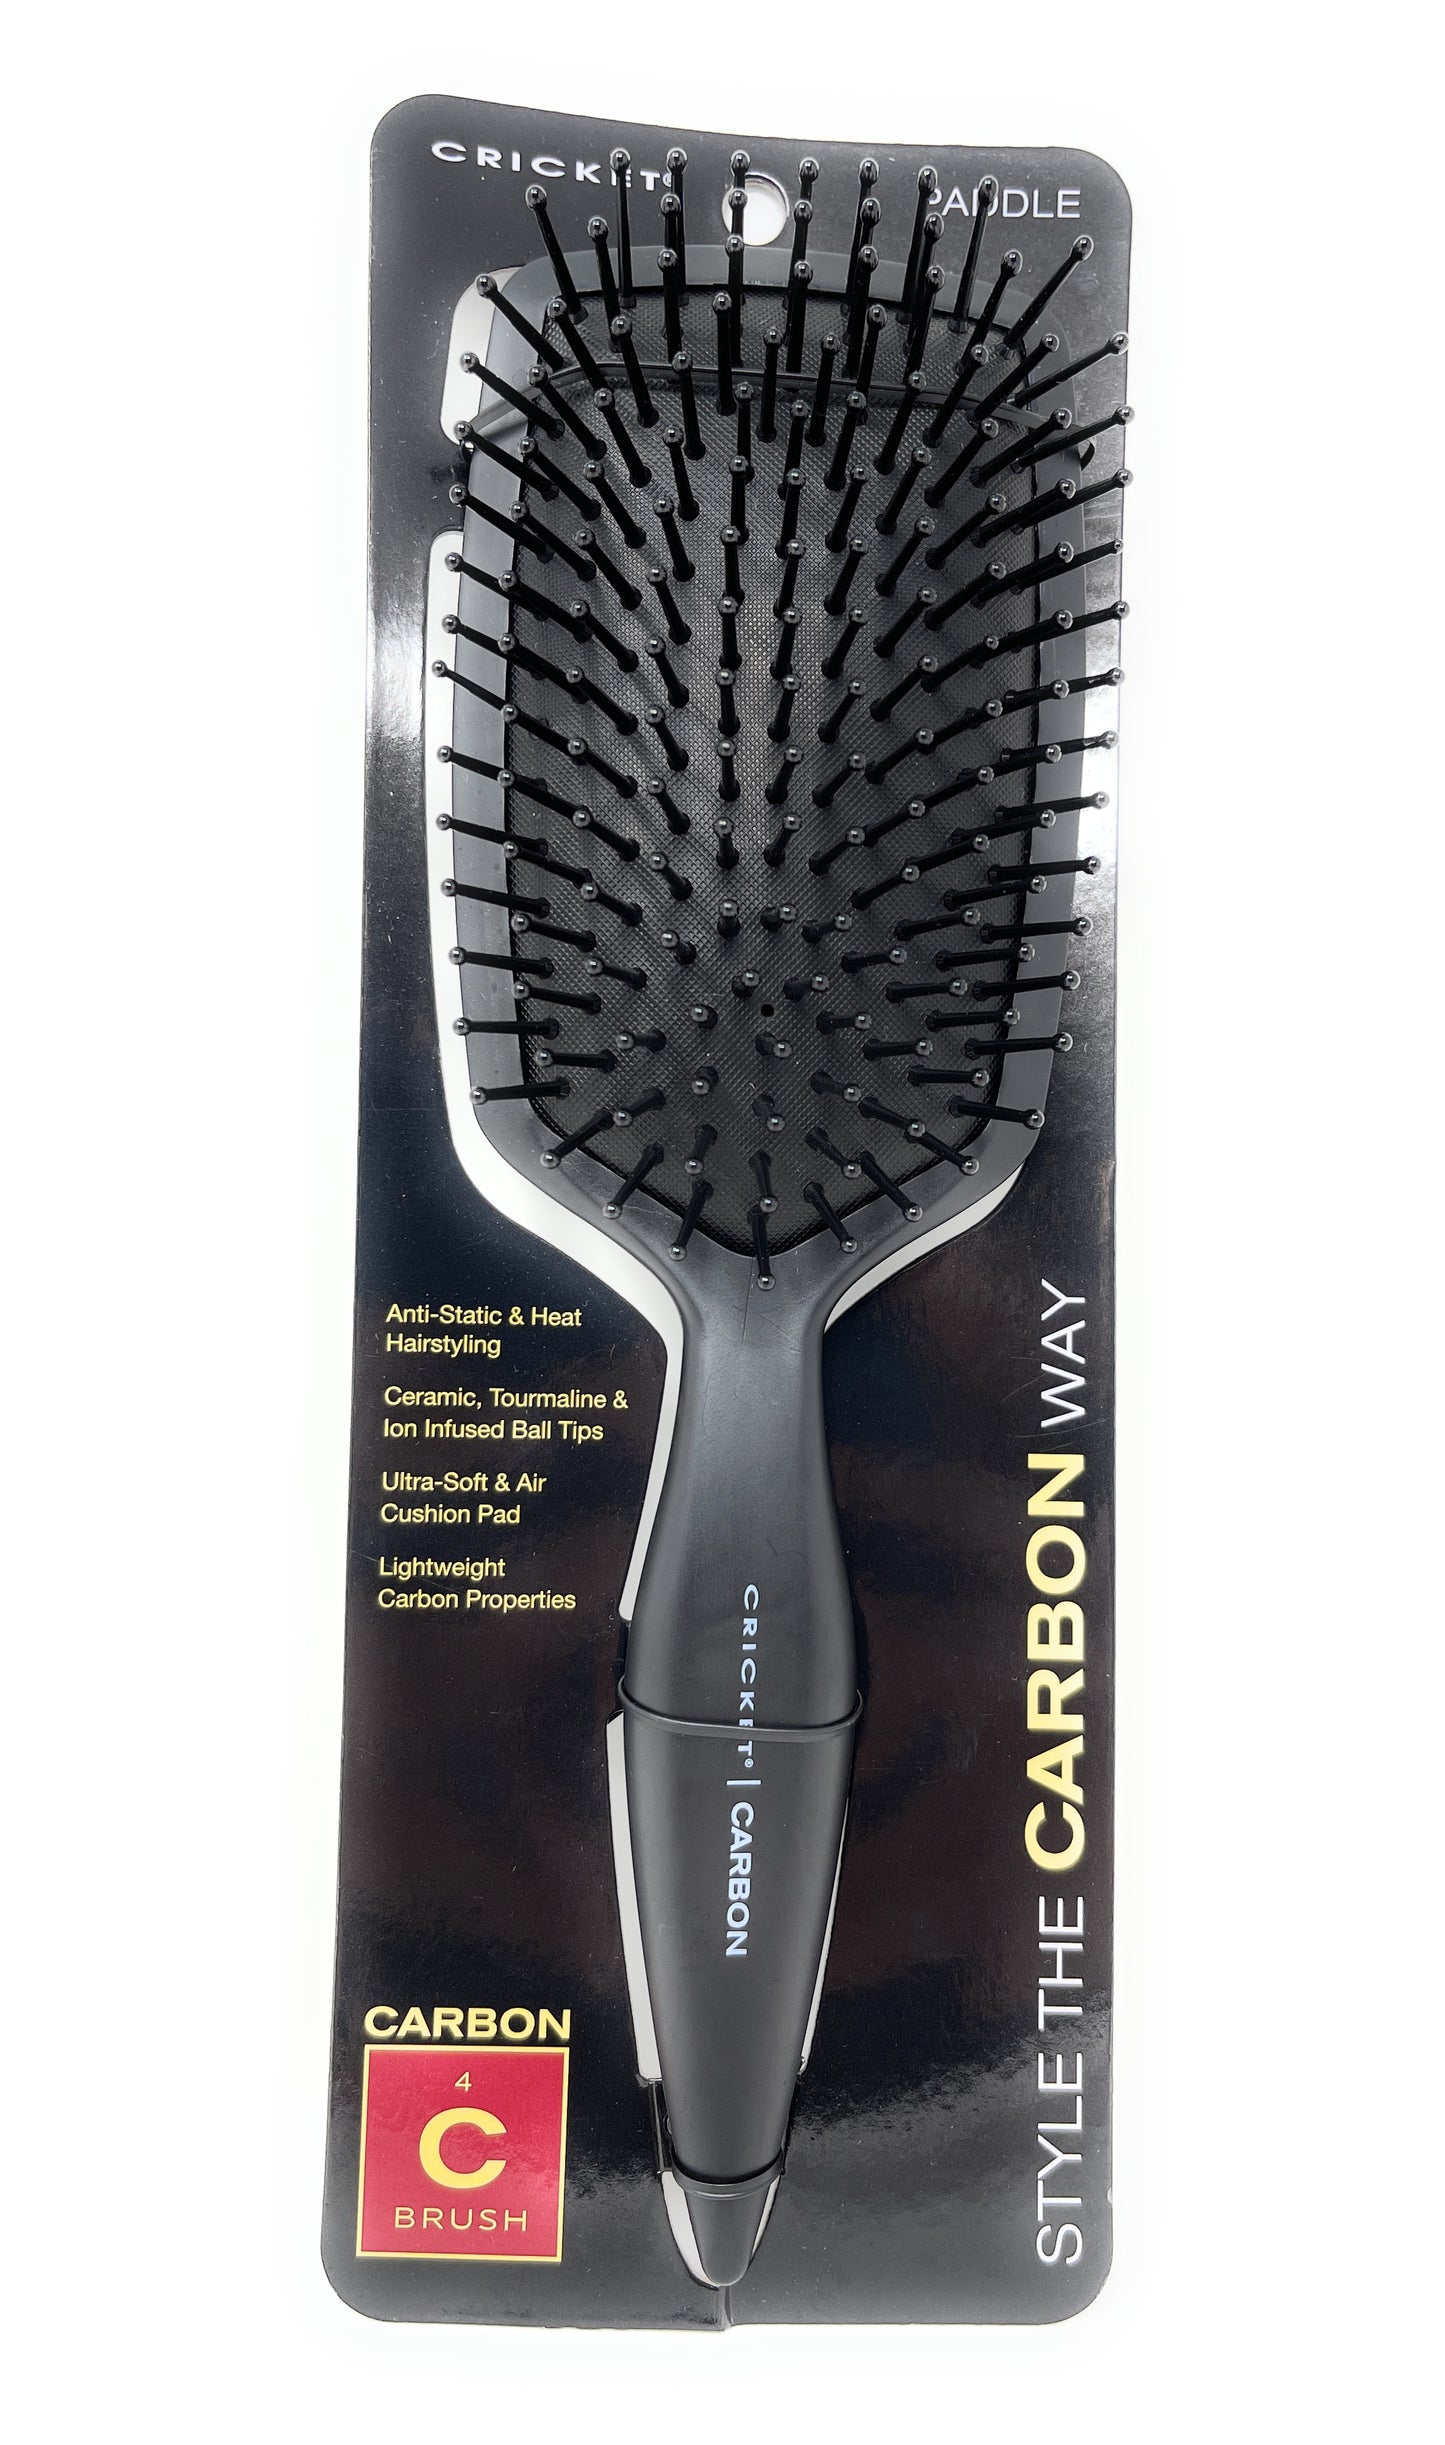 Cricket Carbon Large Wide Paddle Hair Brush for Blow Drying and Styling Ceramic, Tourmaline Ion Bristle Anti-Static Hairbrush